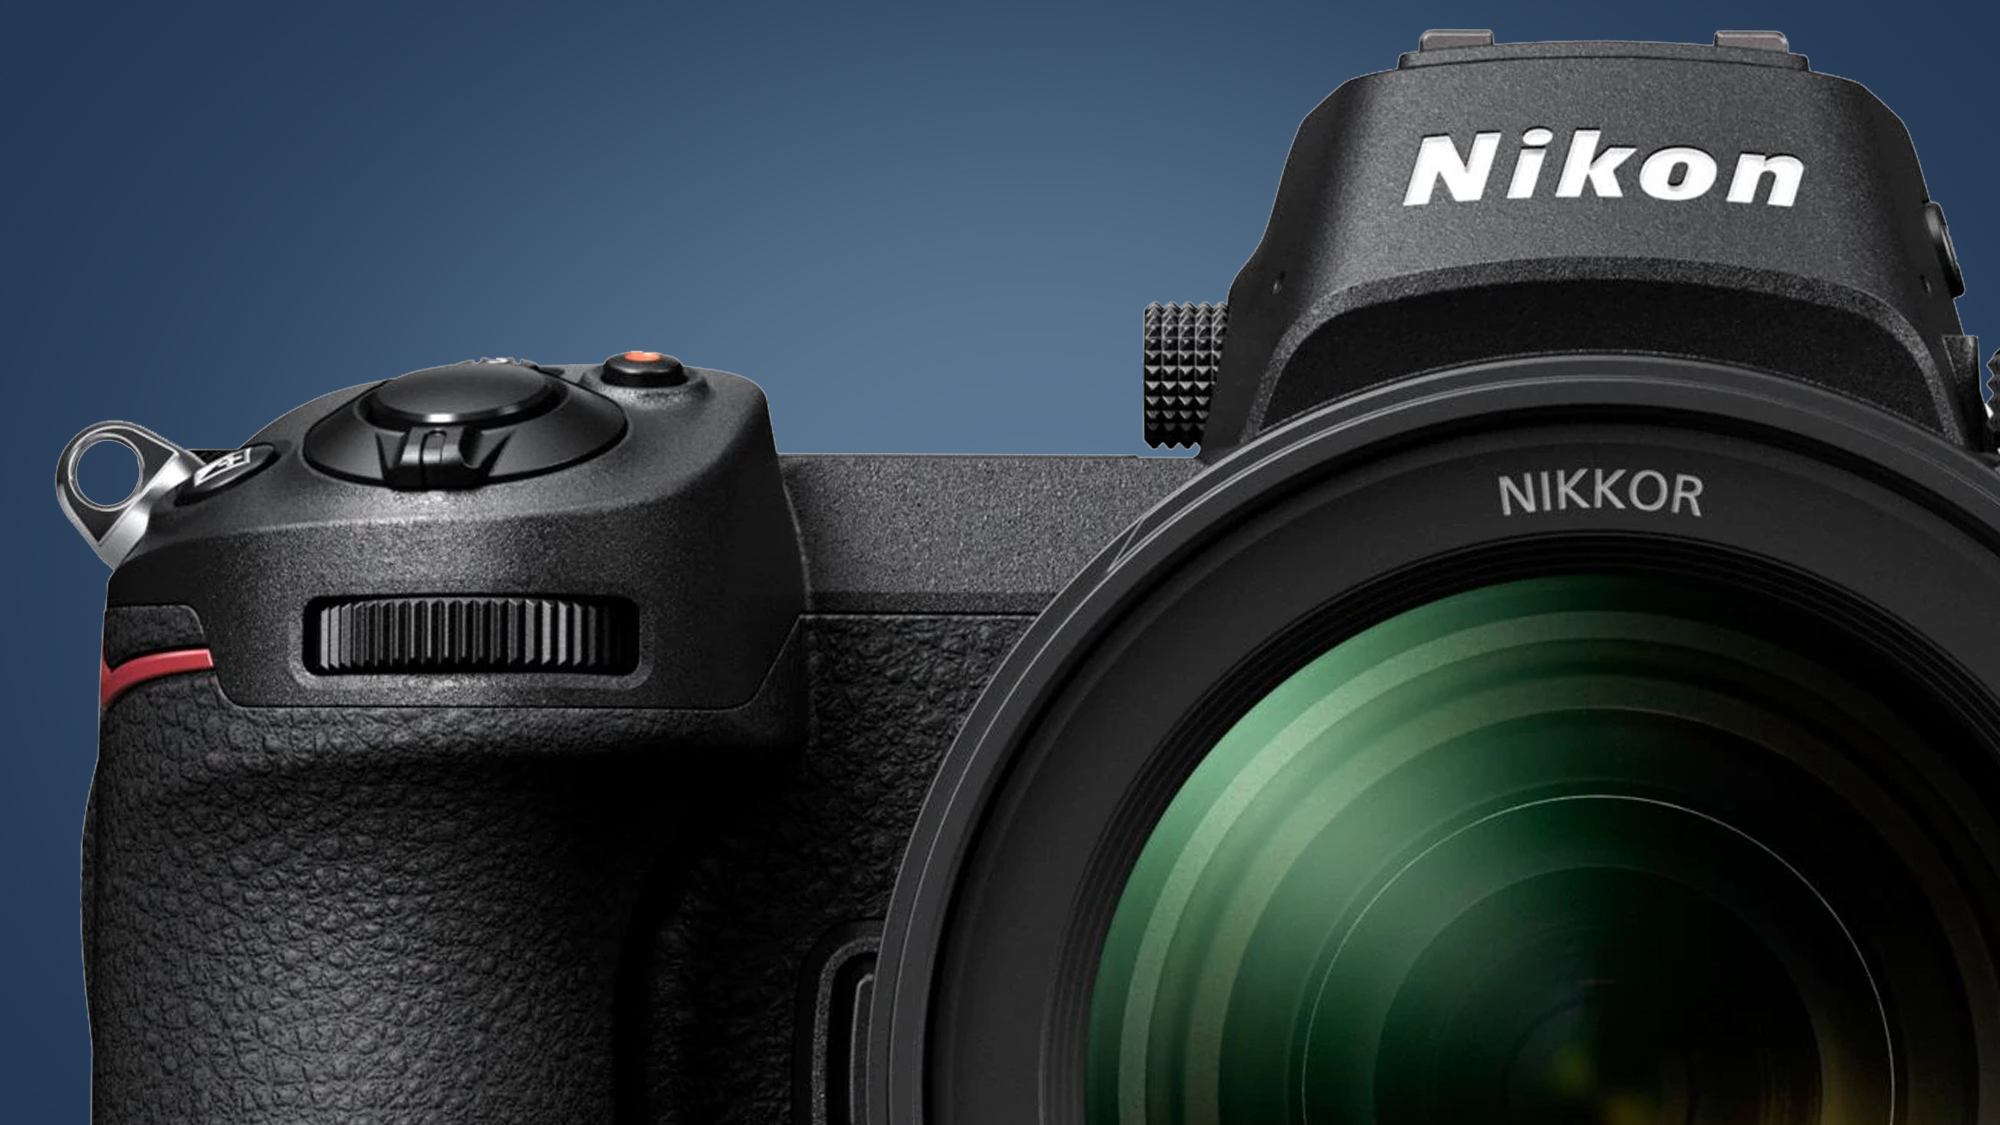 Nikon Z5 and Z30 could soon be its new affordable mirrorless cameras ...